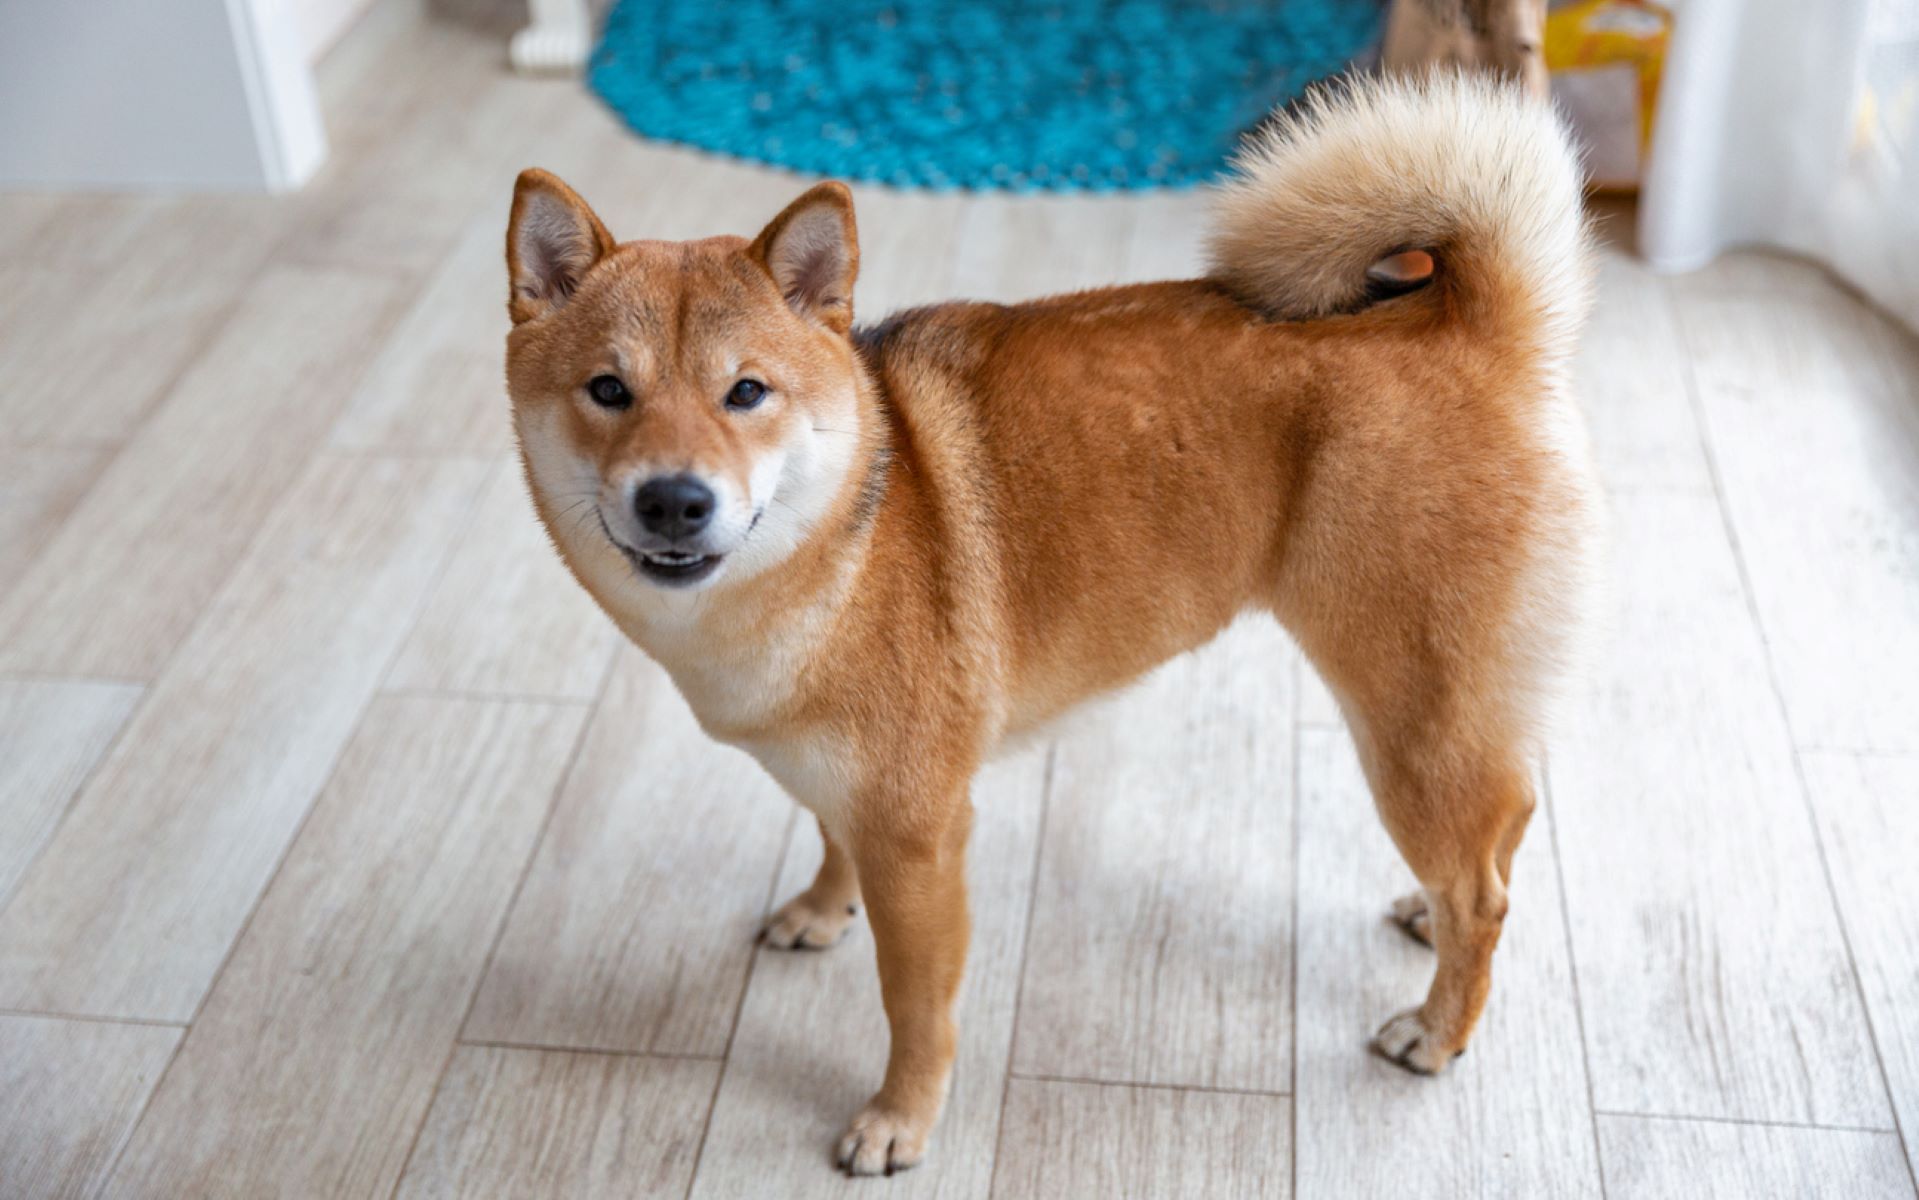 The Shocking Price Of Shiba Inus In Japan Revealed!